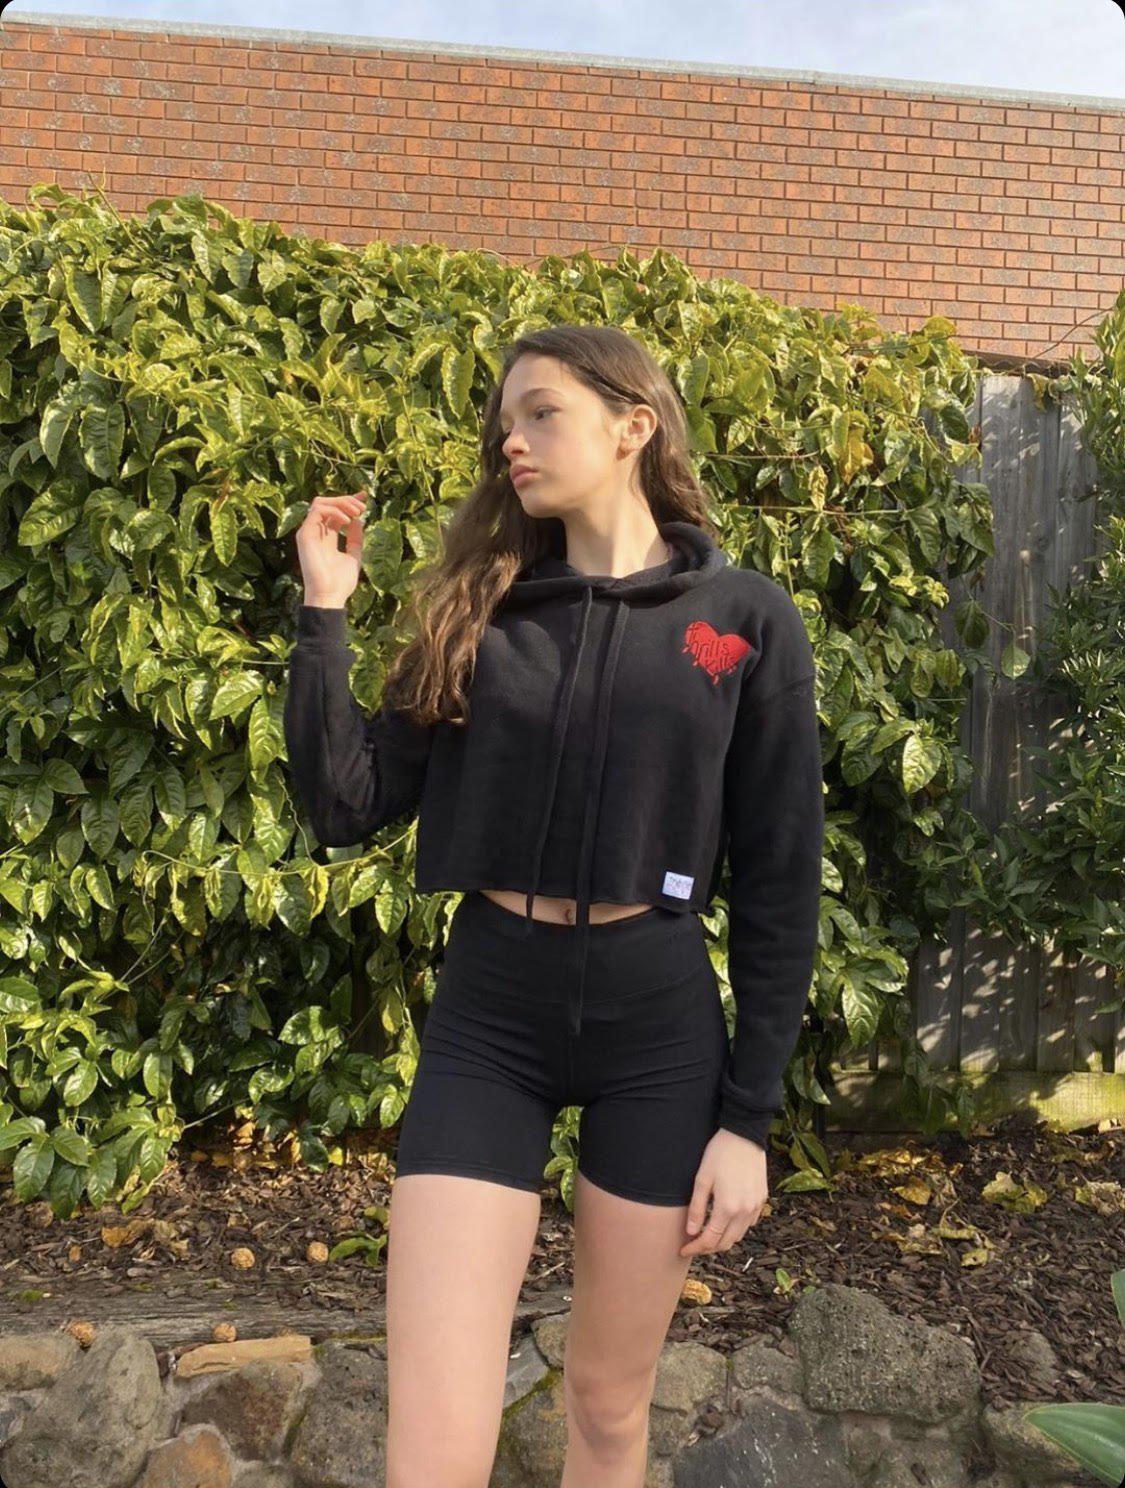 Model pictured showing off her long skinny legs is wearing a Supreme Black Embroidered Love Heart Crop Fleece Hoodie in a garden with green plants in background